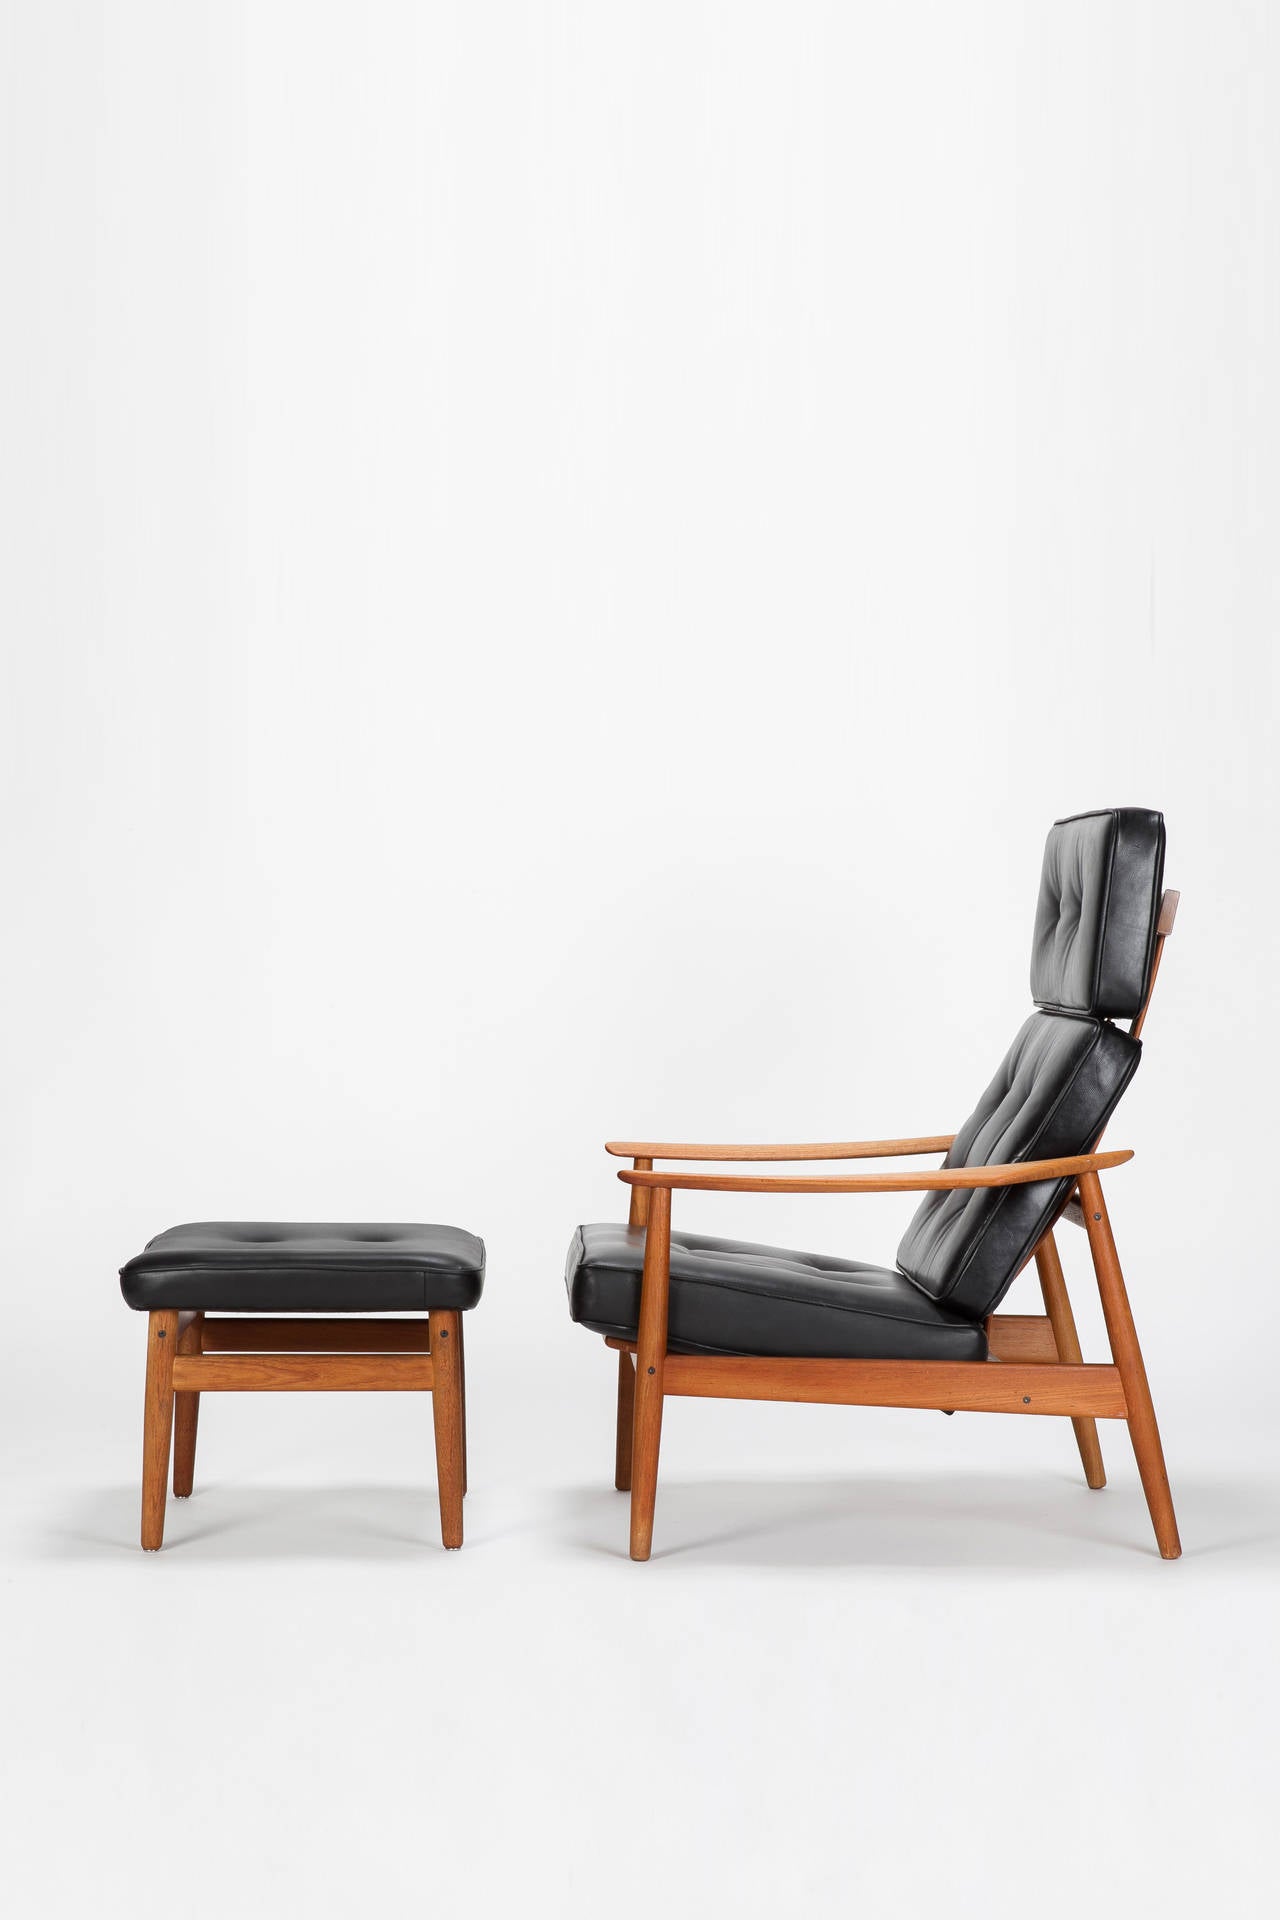 Danish reclining lounge chair and matching ottoman by Arne Vodder, model 164 for France & Son. Manufactured in the 1960's in Denmark. Frame is made of solid teak wood, upholstered in black leather. Adjustable position, black leather cover was